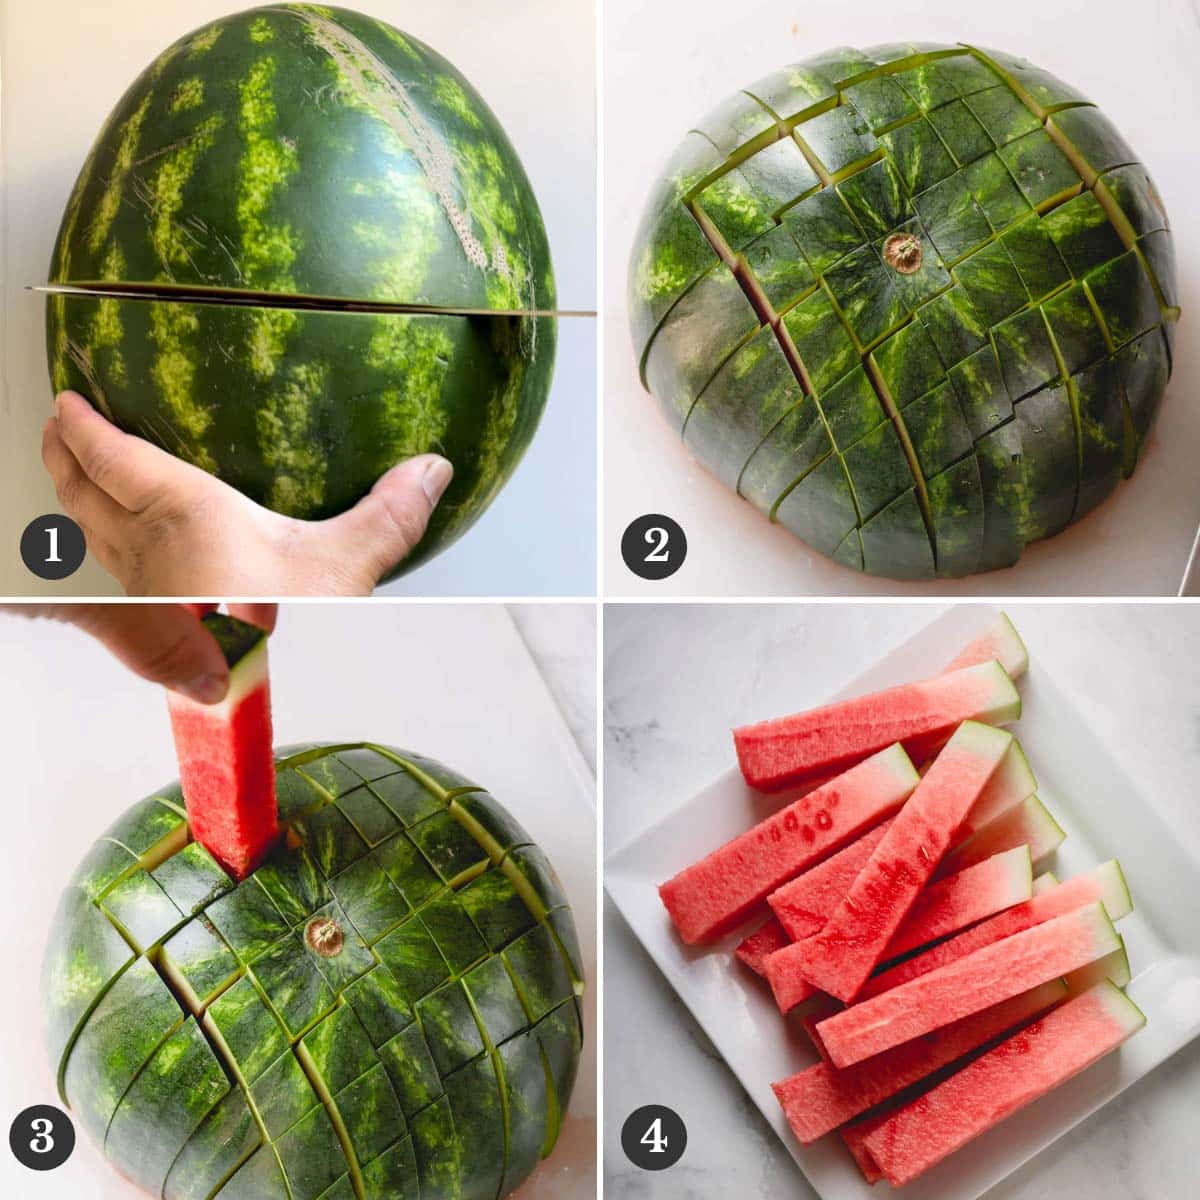 Step by step photos of cutting a watermelon into sticks.